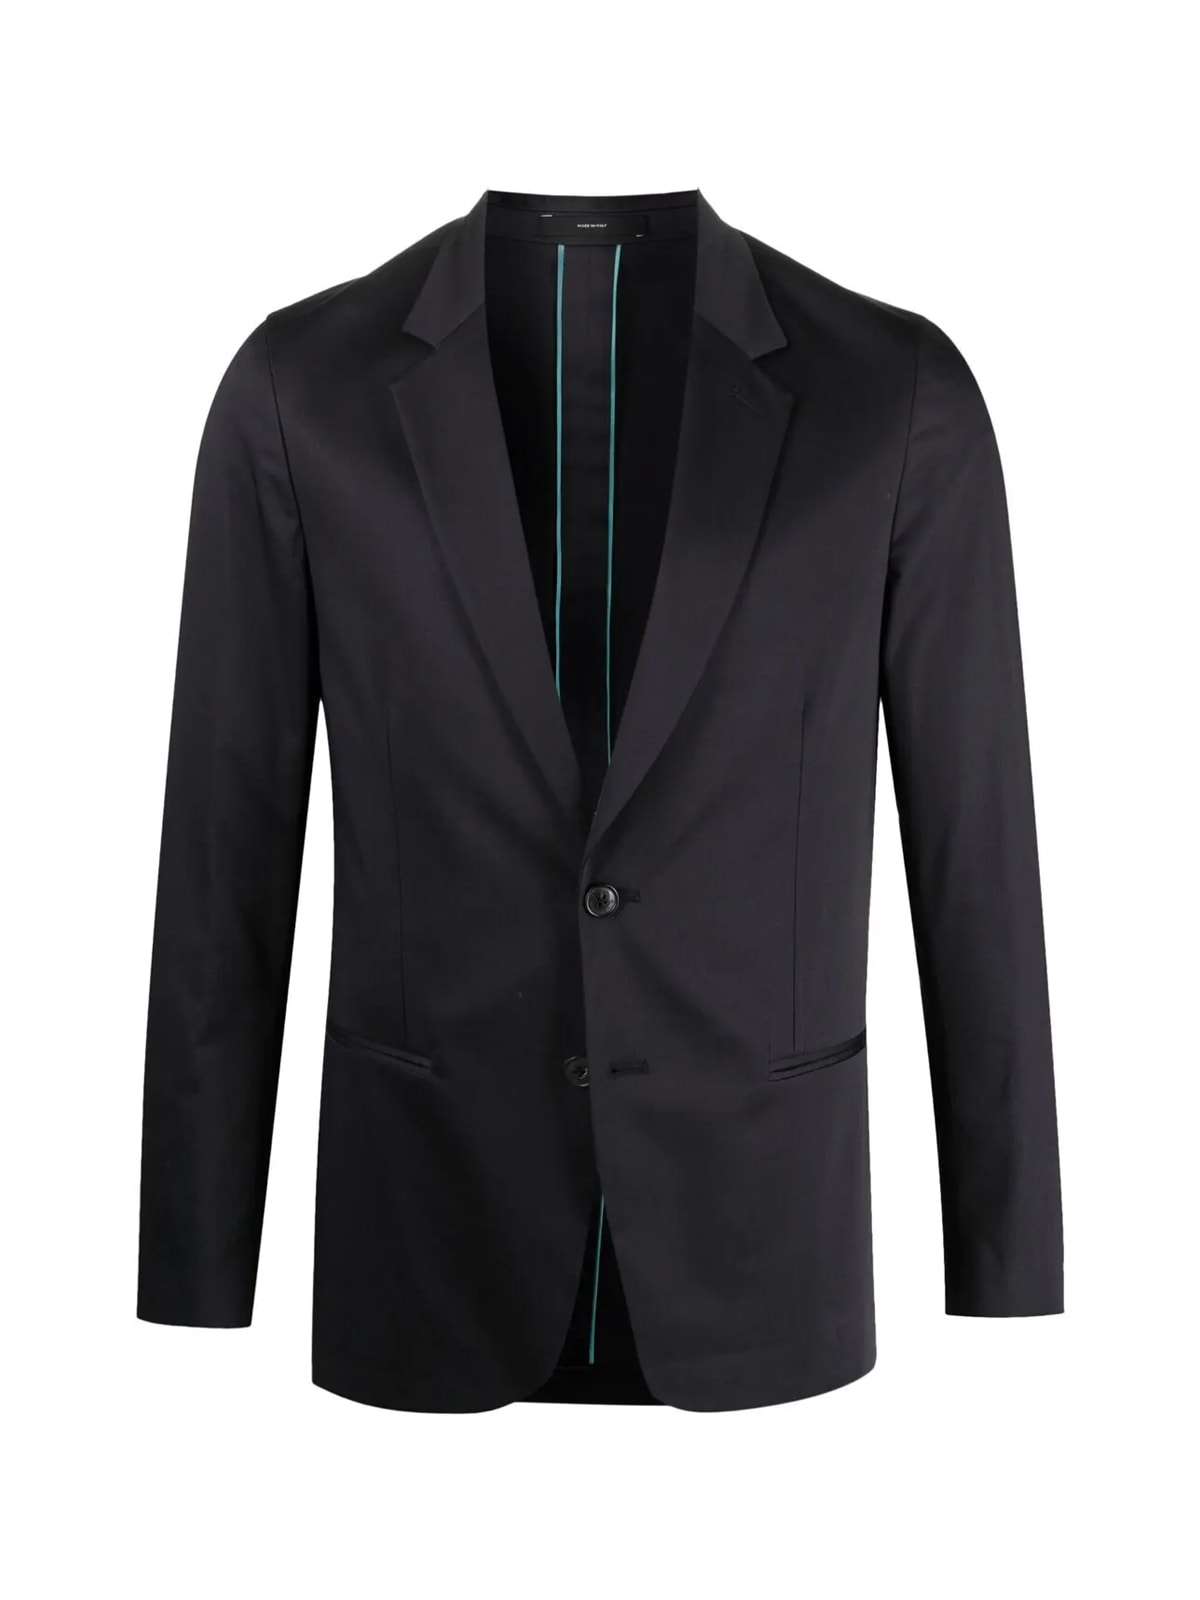 Paul Smith Gents Tailored Fit 2 Btn Jacket